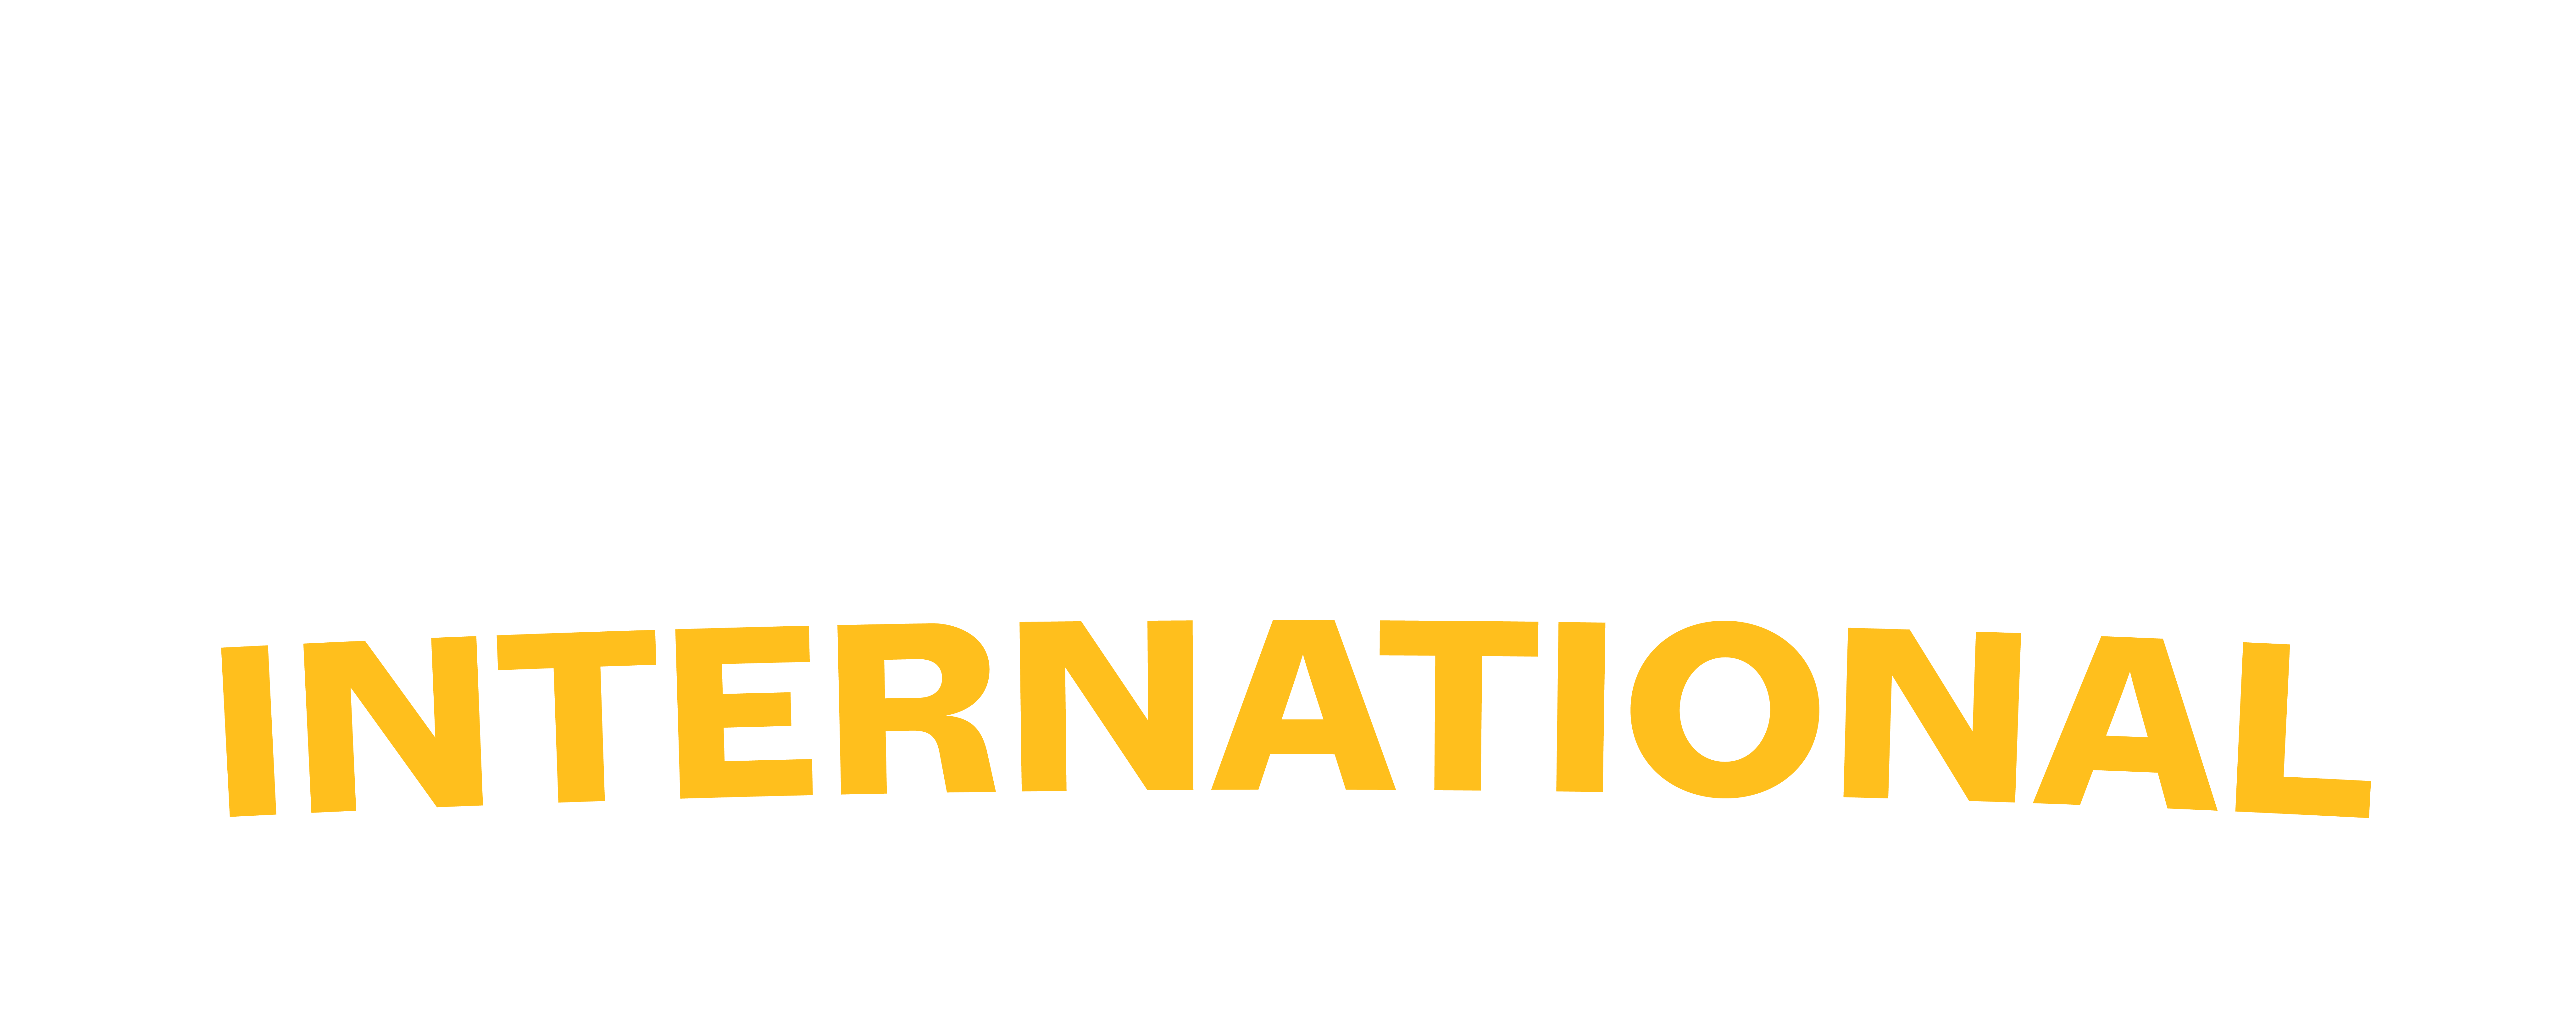 mxlan international economic summit festival mcallen latino latinx music arts best fesitval in texas acl south by south west coachella rio grande valley south padre island brownsville indie best latino festival in us breakthrough stage